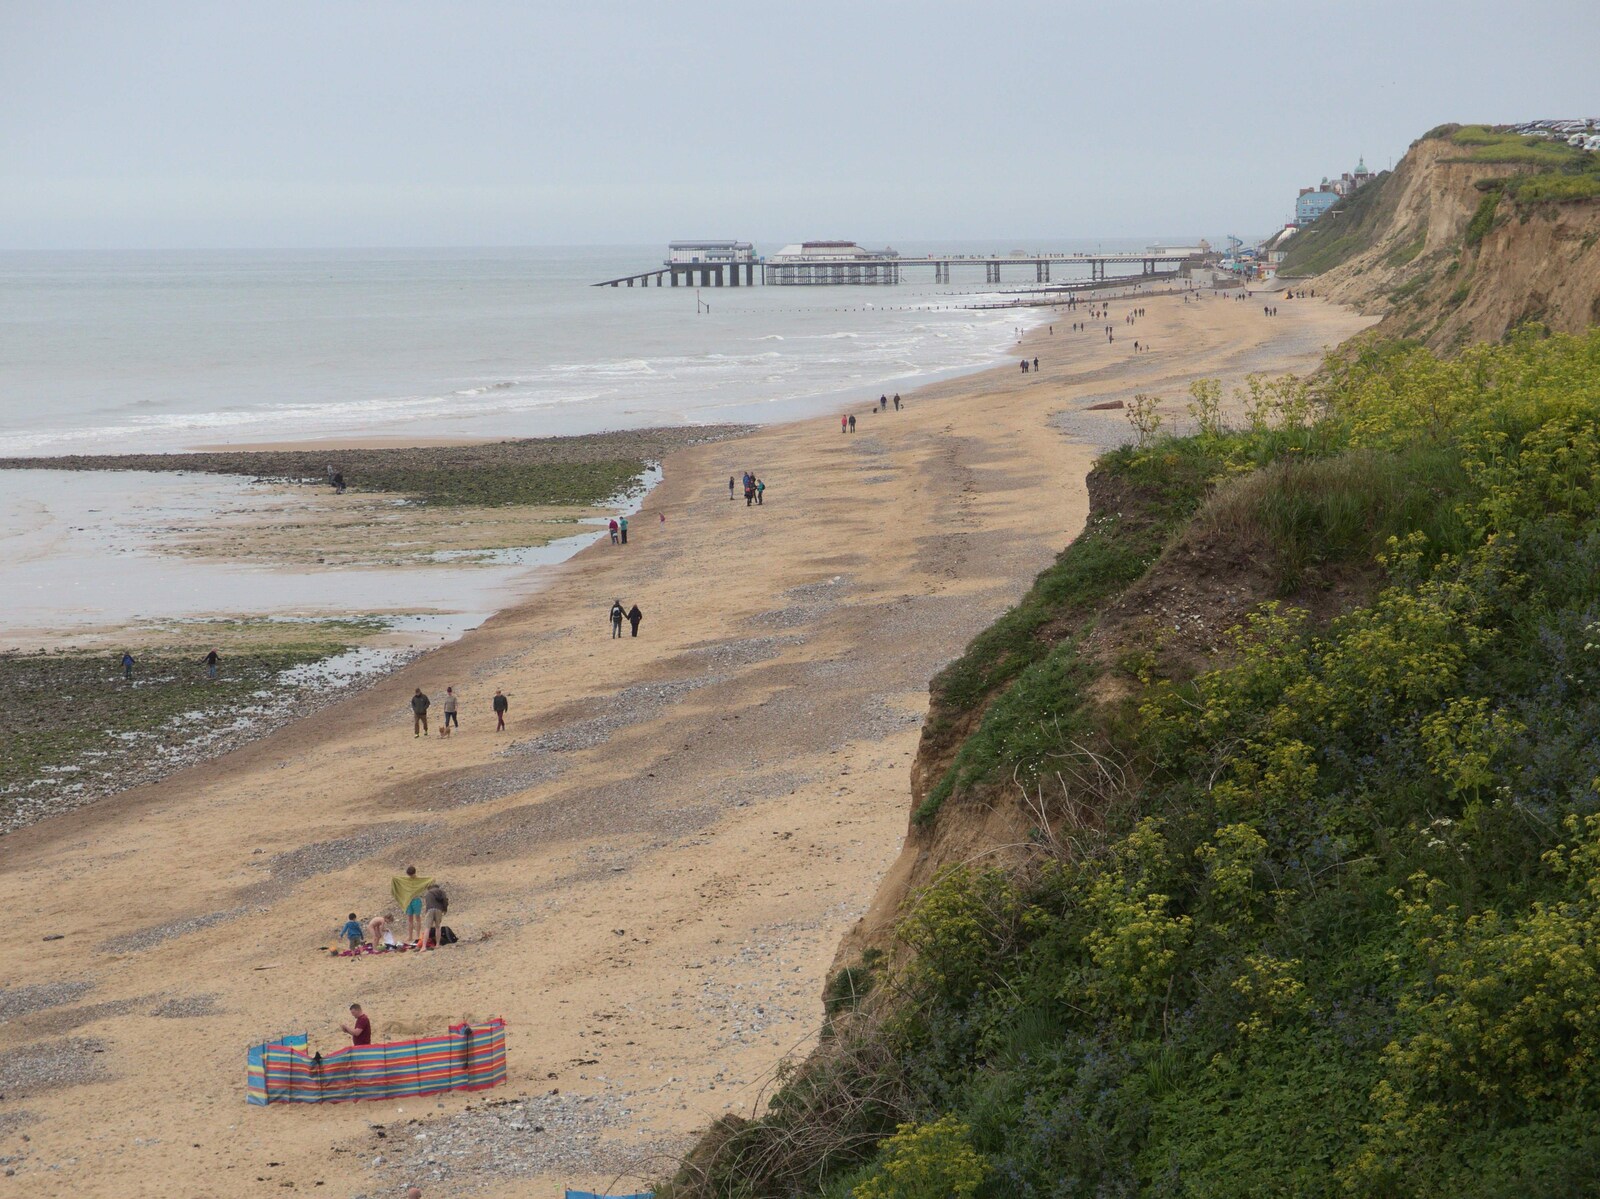 The view over East Runton beach to Cromer from A Birthday Camping Trip, East Runton, North Norfolk - 26th May 2015